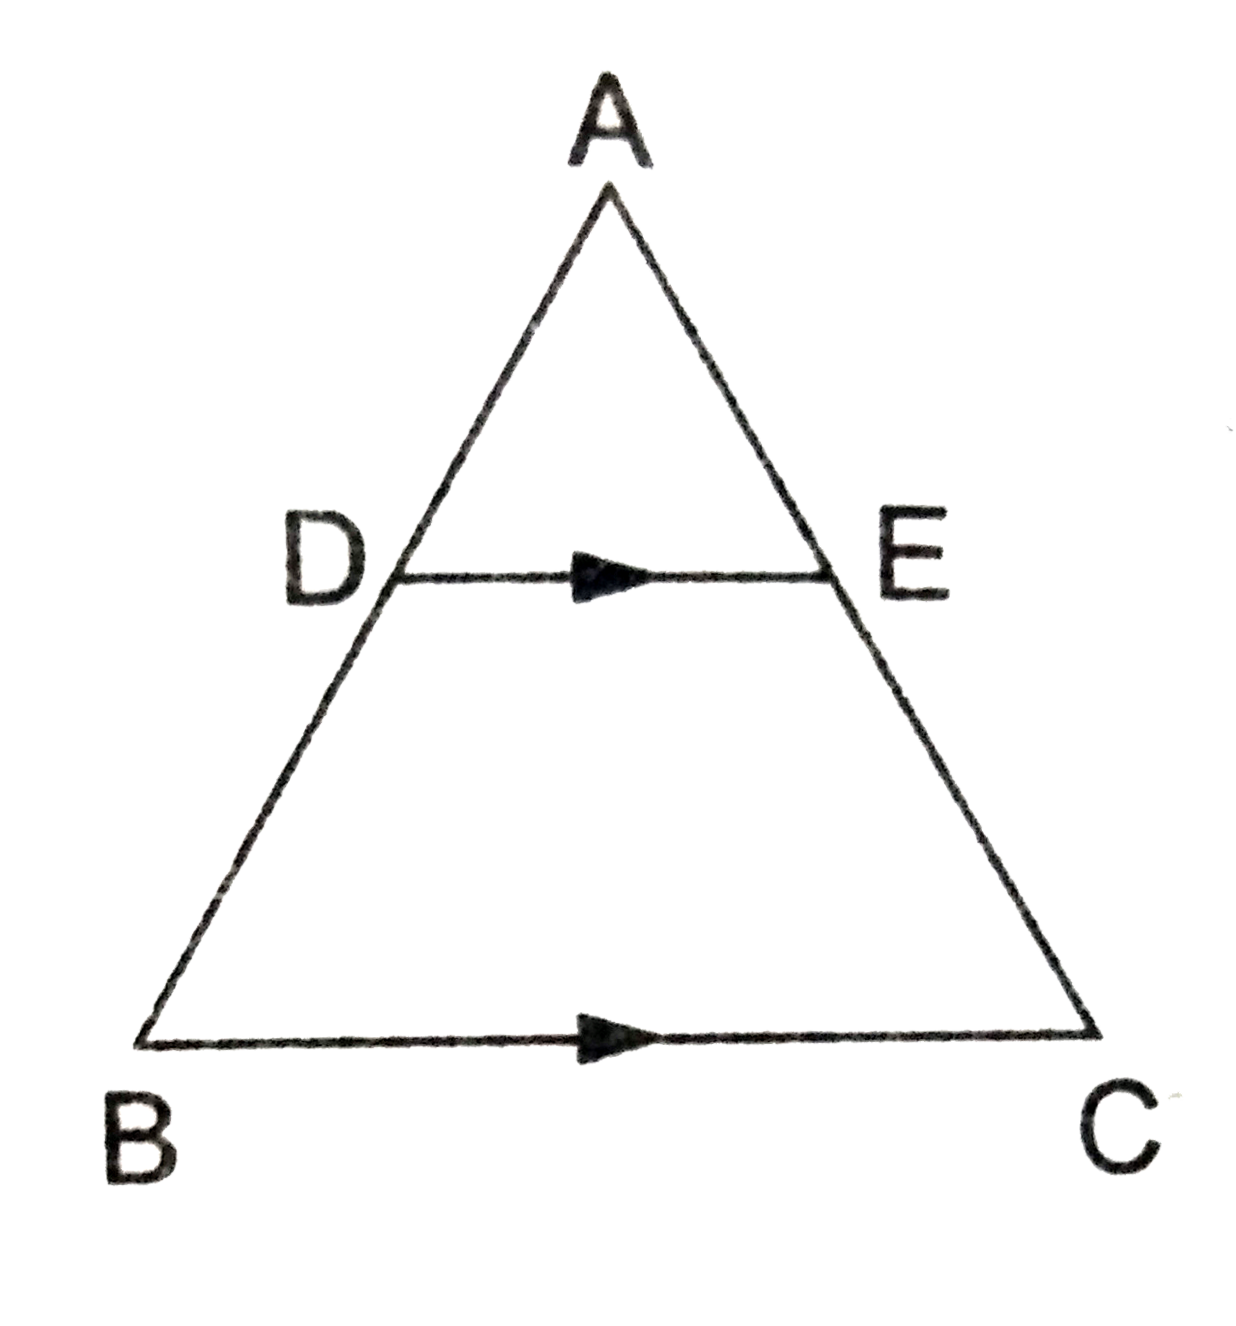 In Delta ABC , DE||BC such that (AD)/(DB)=(3)/(5) . If AC=5.6 cm then, AE=?